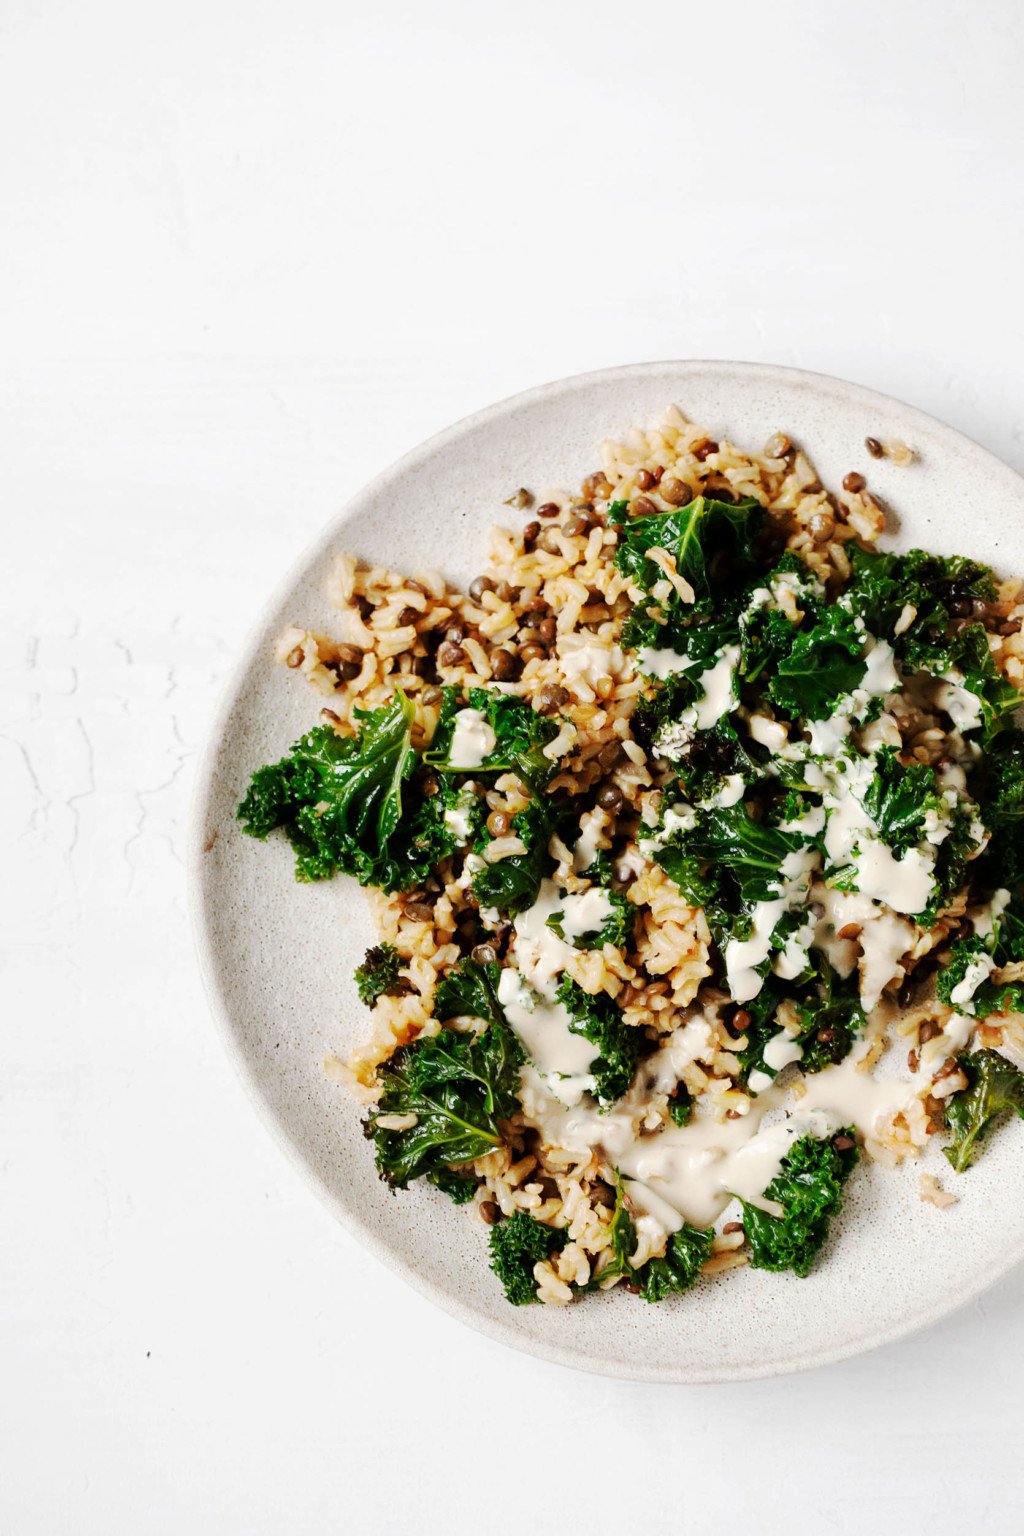 A pale, ceramic plate has been topped with a vegan dish of rice, lentils, kale, and a creamy sauce.